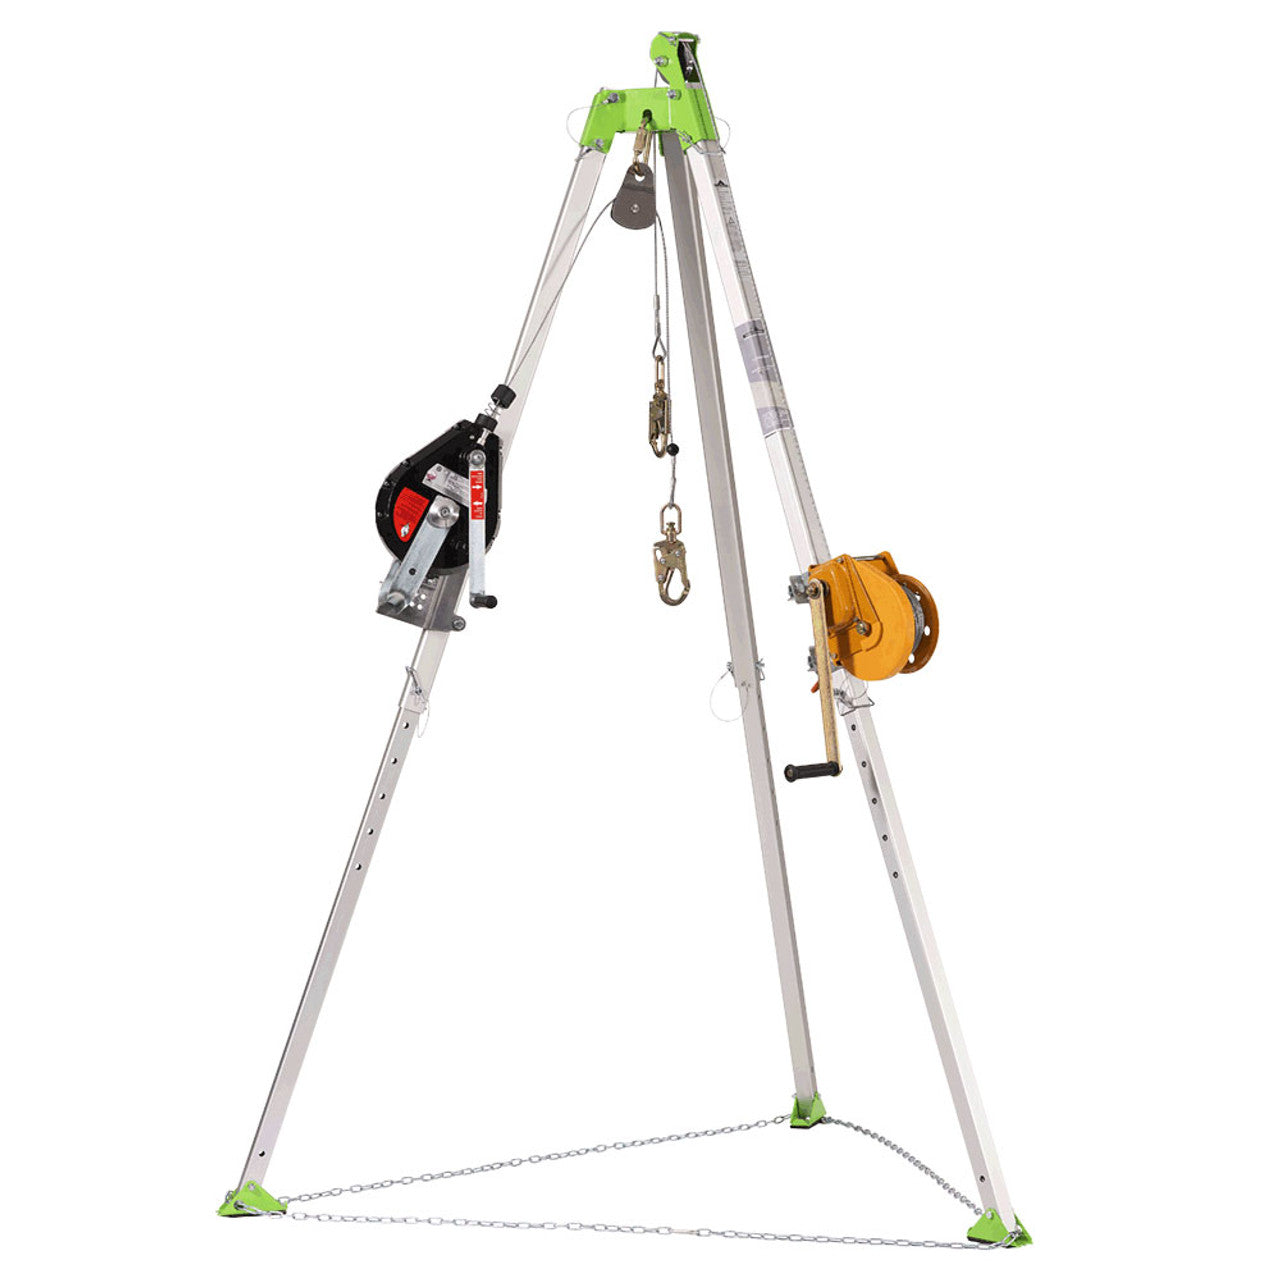 Confined Space Kit Tripod, Winch, Harness